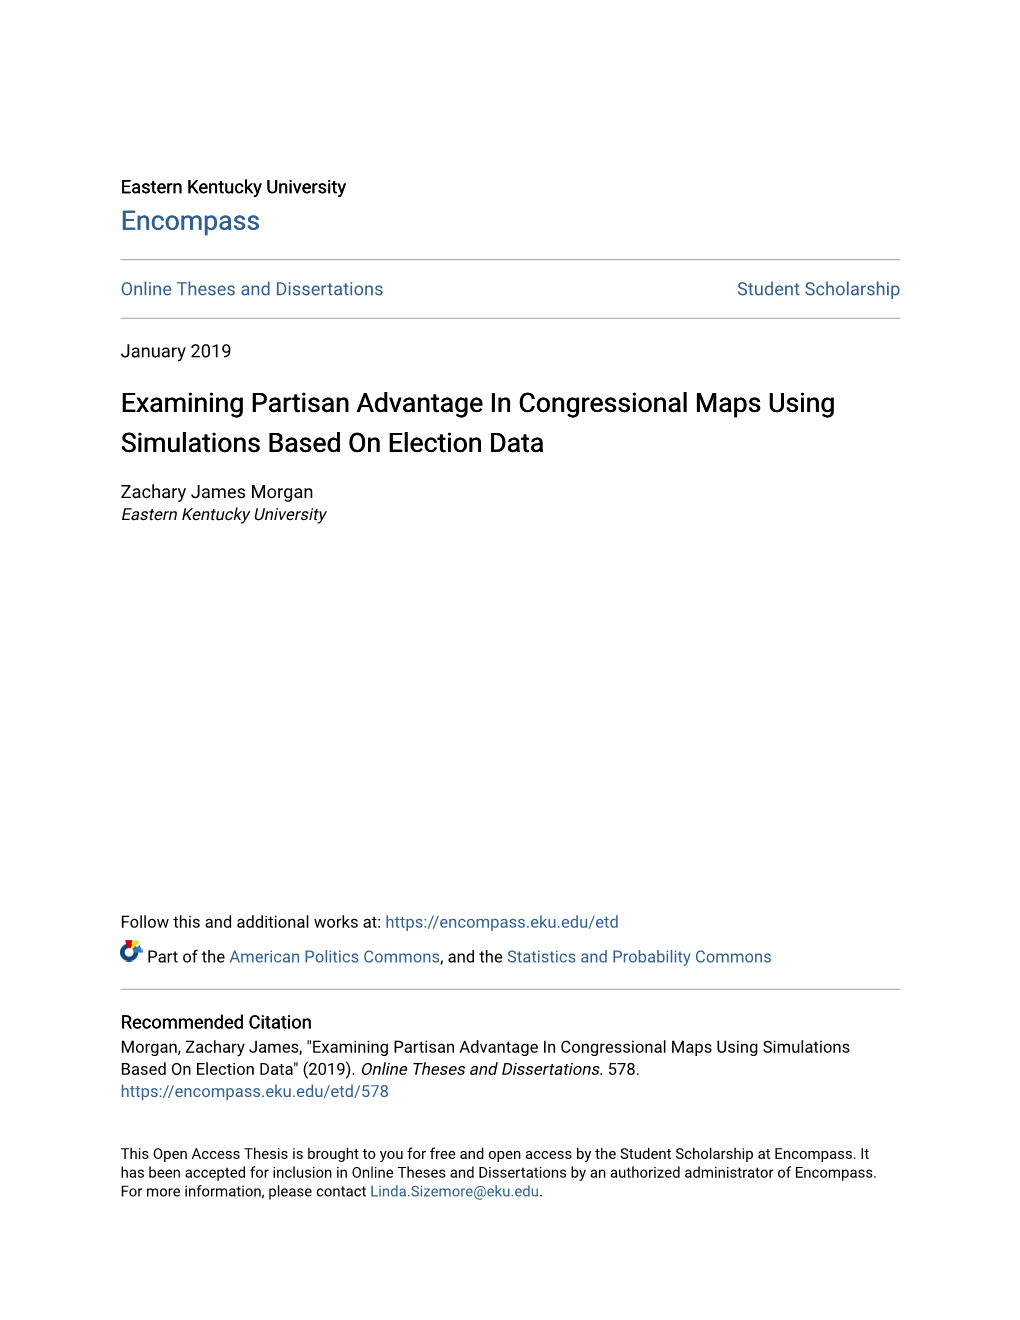 Examining Partisan Advantage in Congressional Maps Using Simulations Based on Election Data